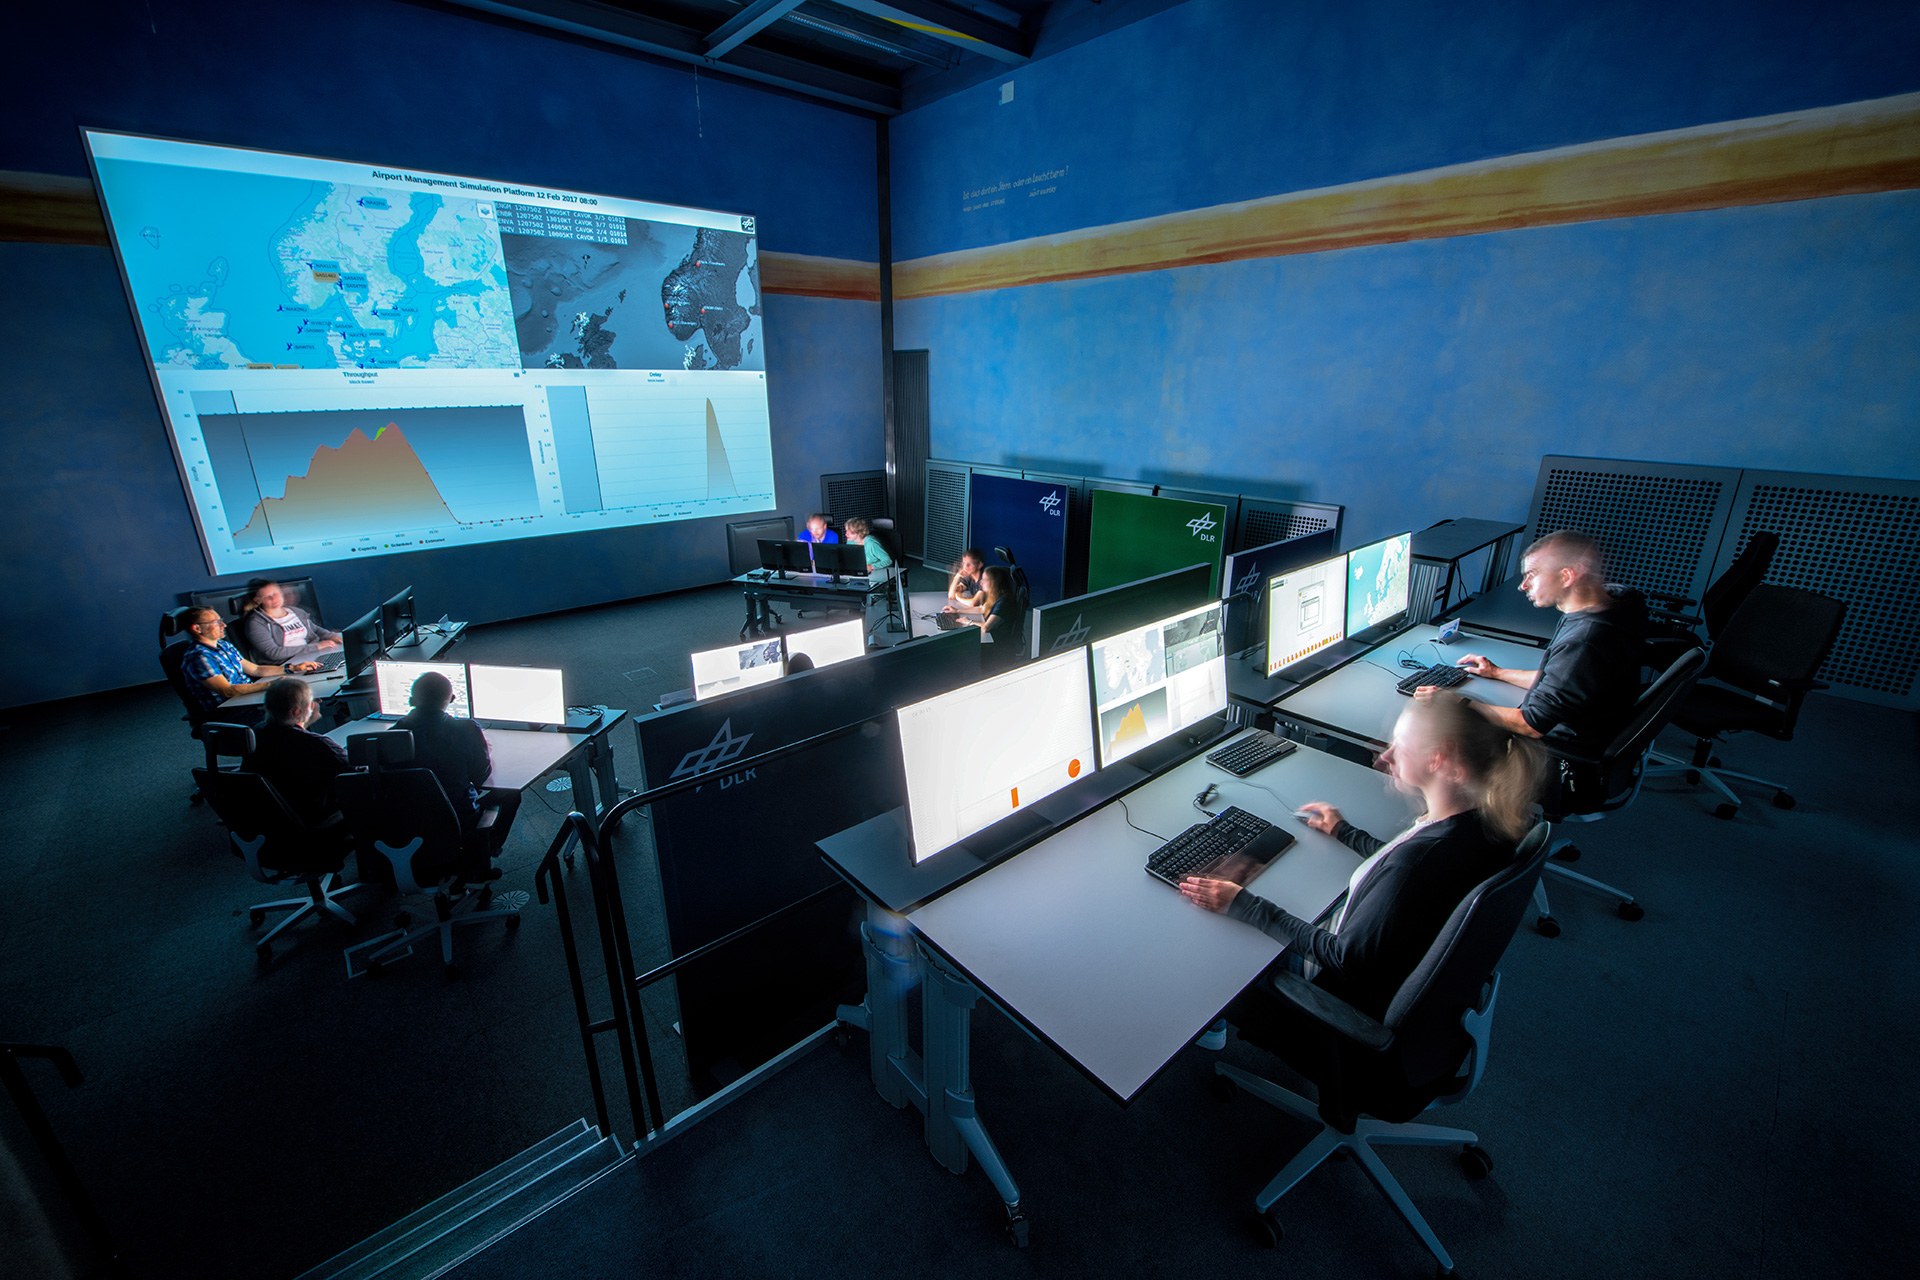 DLR Airport and Control Center Simulator (ACCES)